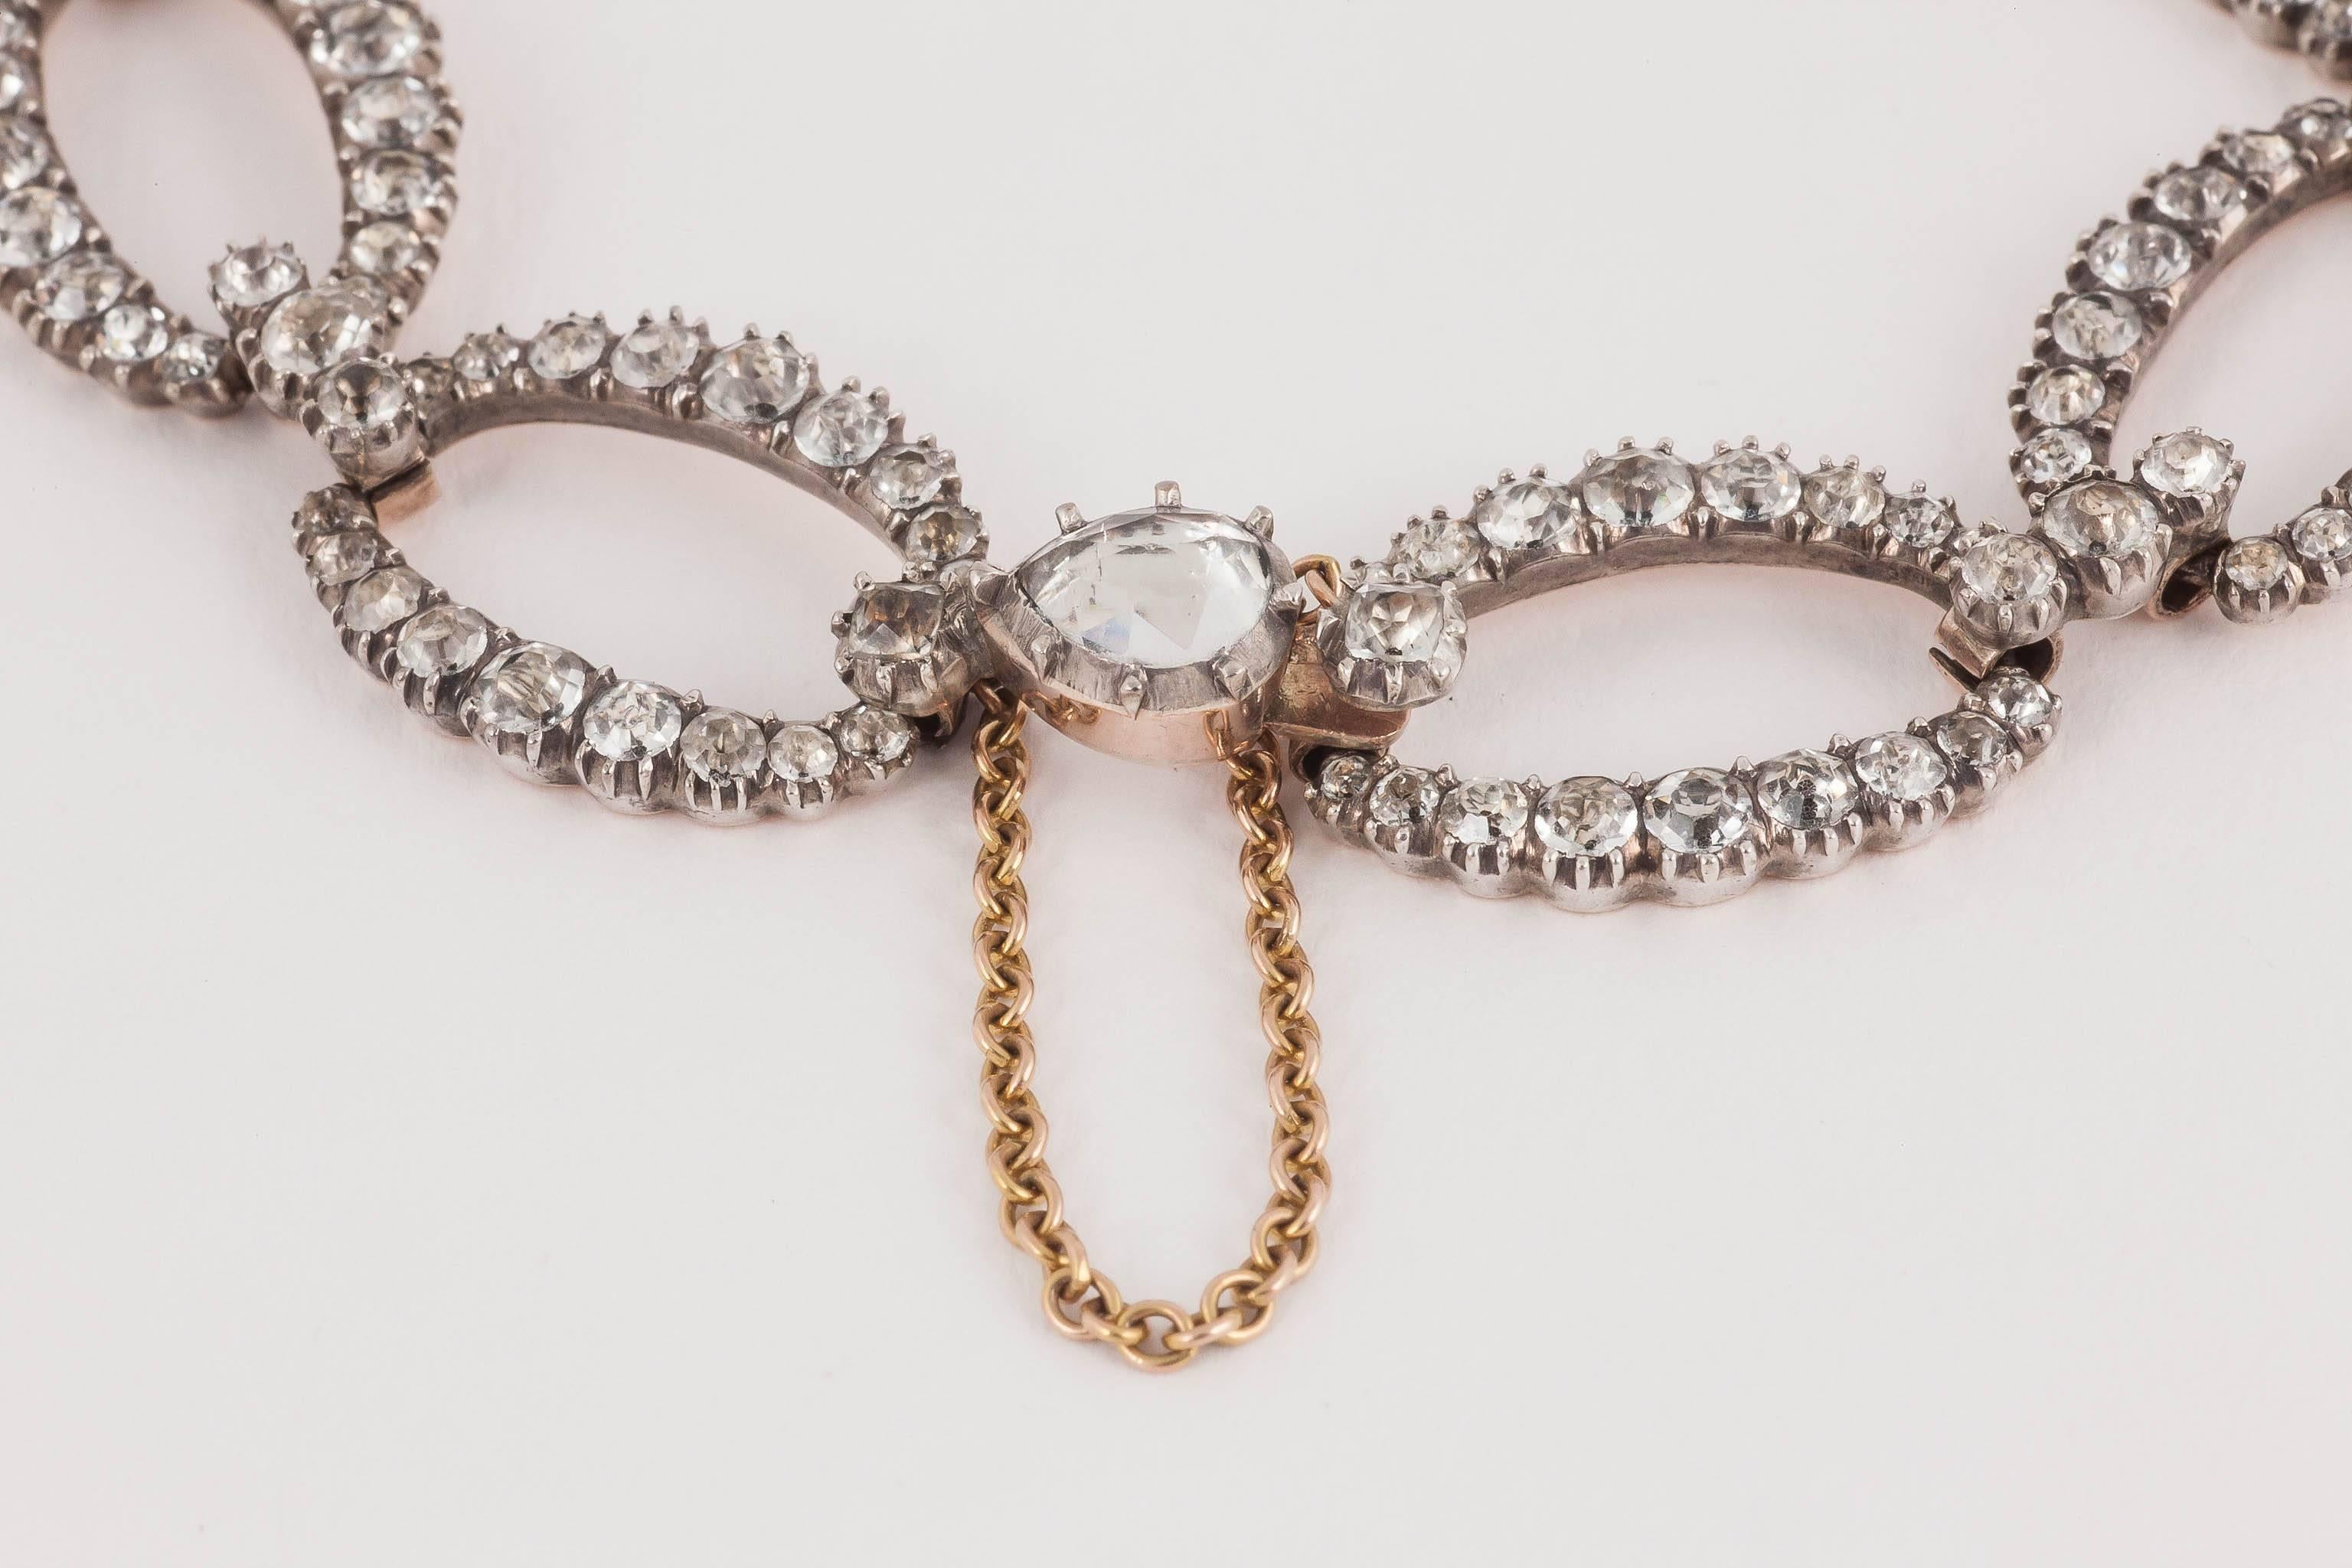 A rare late George III white paste bracelet with graduated oval clusters set in silver and backed in gold, all brightly foiled. Two clasps with pear shaped paste in each.
Measures 15mm in width x 23cm in length.
Antique piece (over 100 years old)